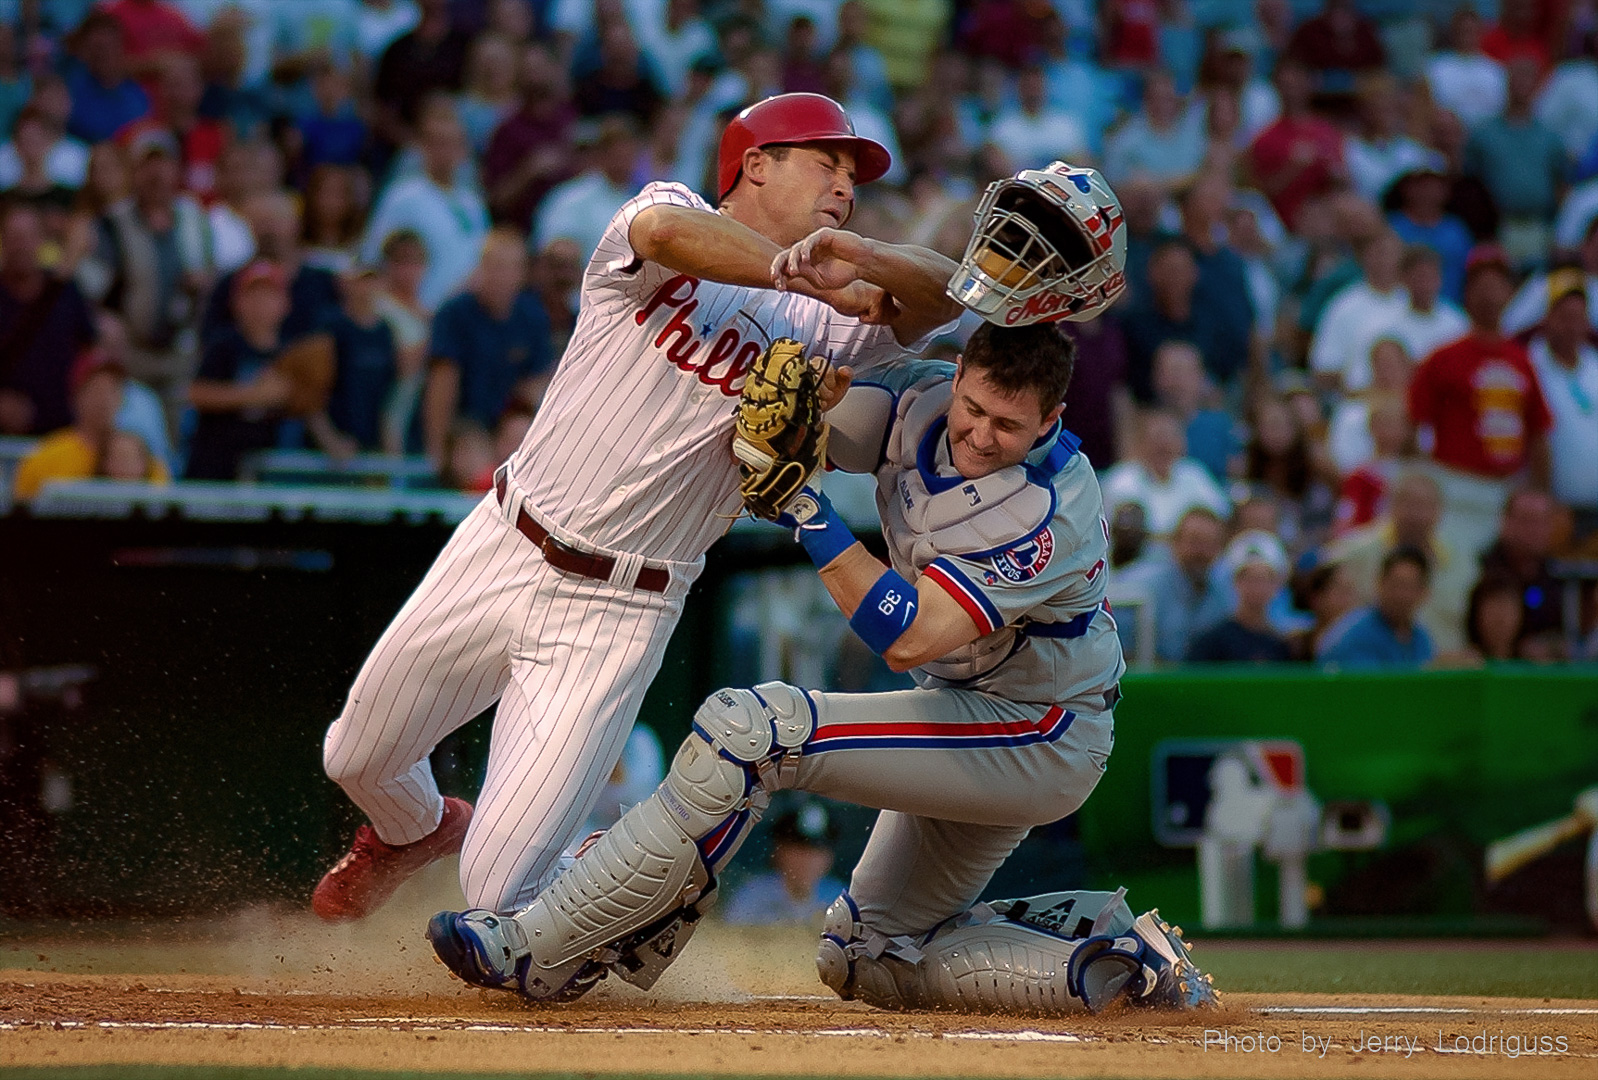 Phillies Pat Burrell is out at home as he crashes into Expos catcher Brian Schneider trying unsuccessfully to score from first base on a hit by Tyler Houston in the second inning of this 2004 game.